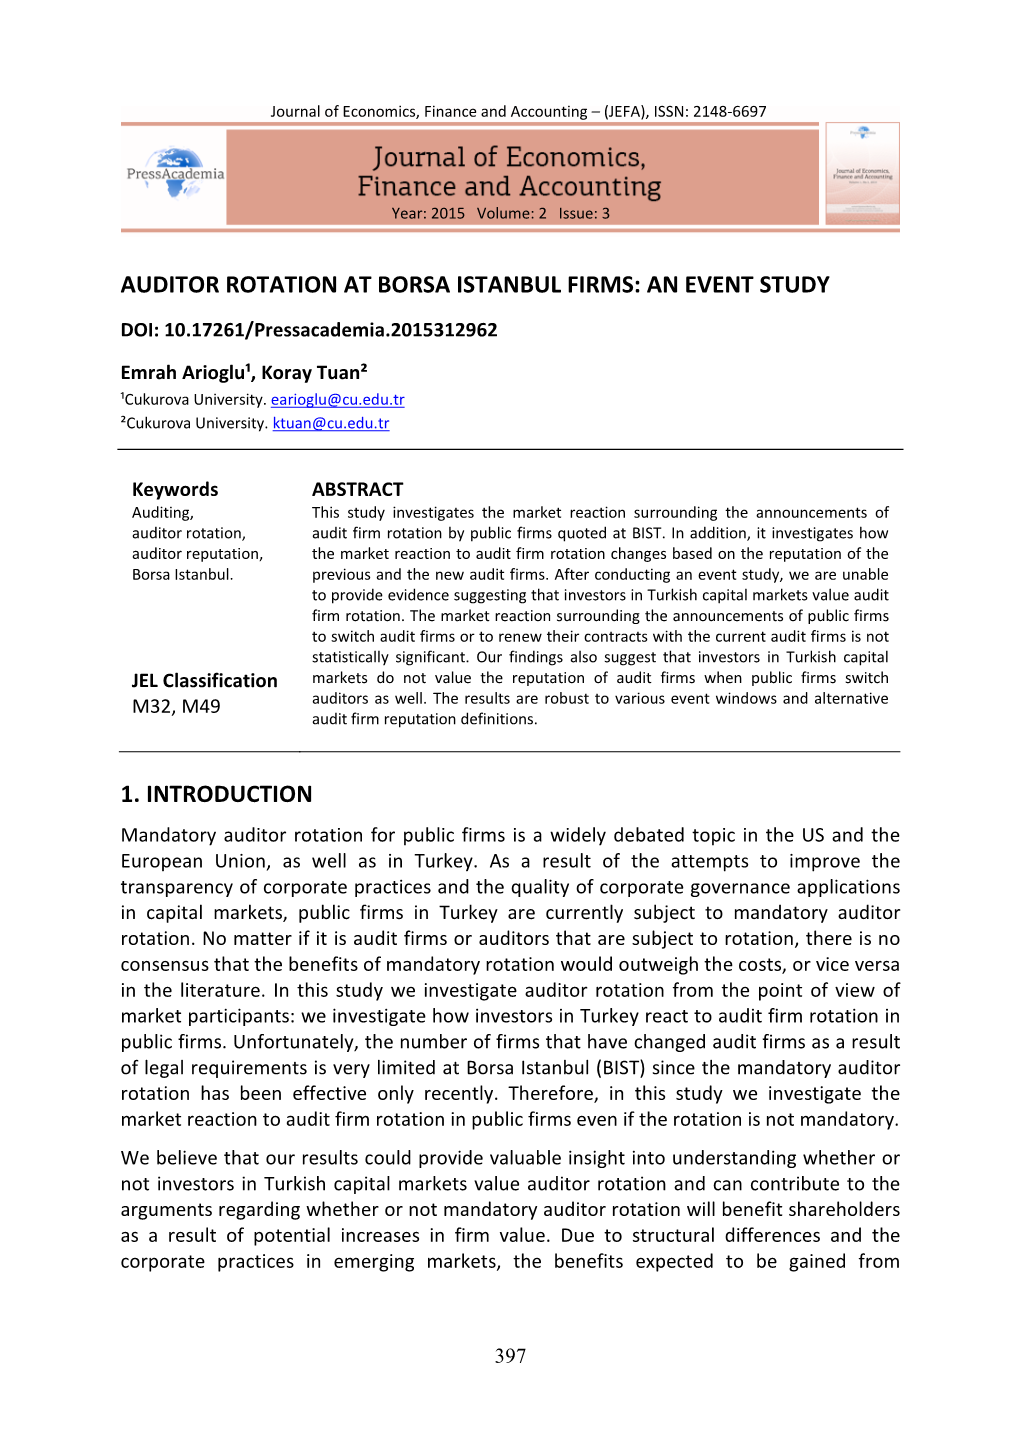 Auditor Rotation at Borsa Istanbul Firms: an Event Study